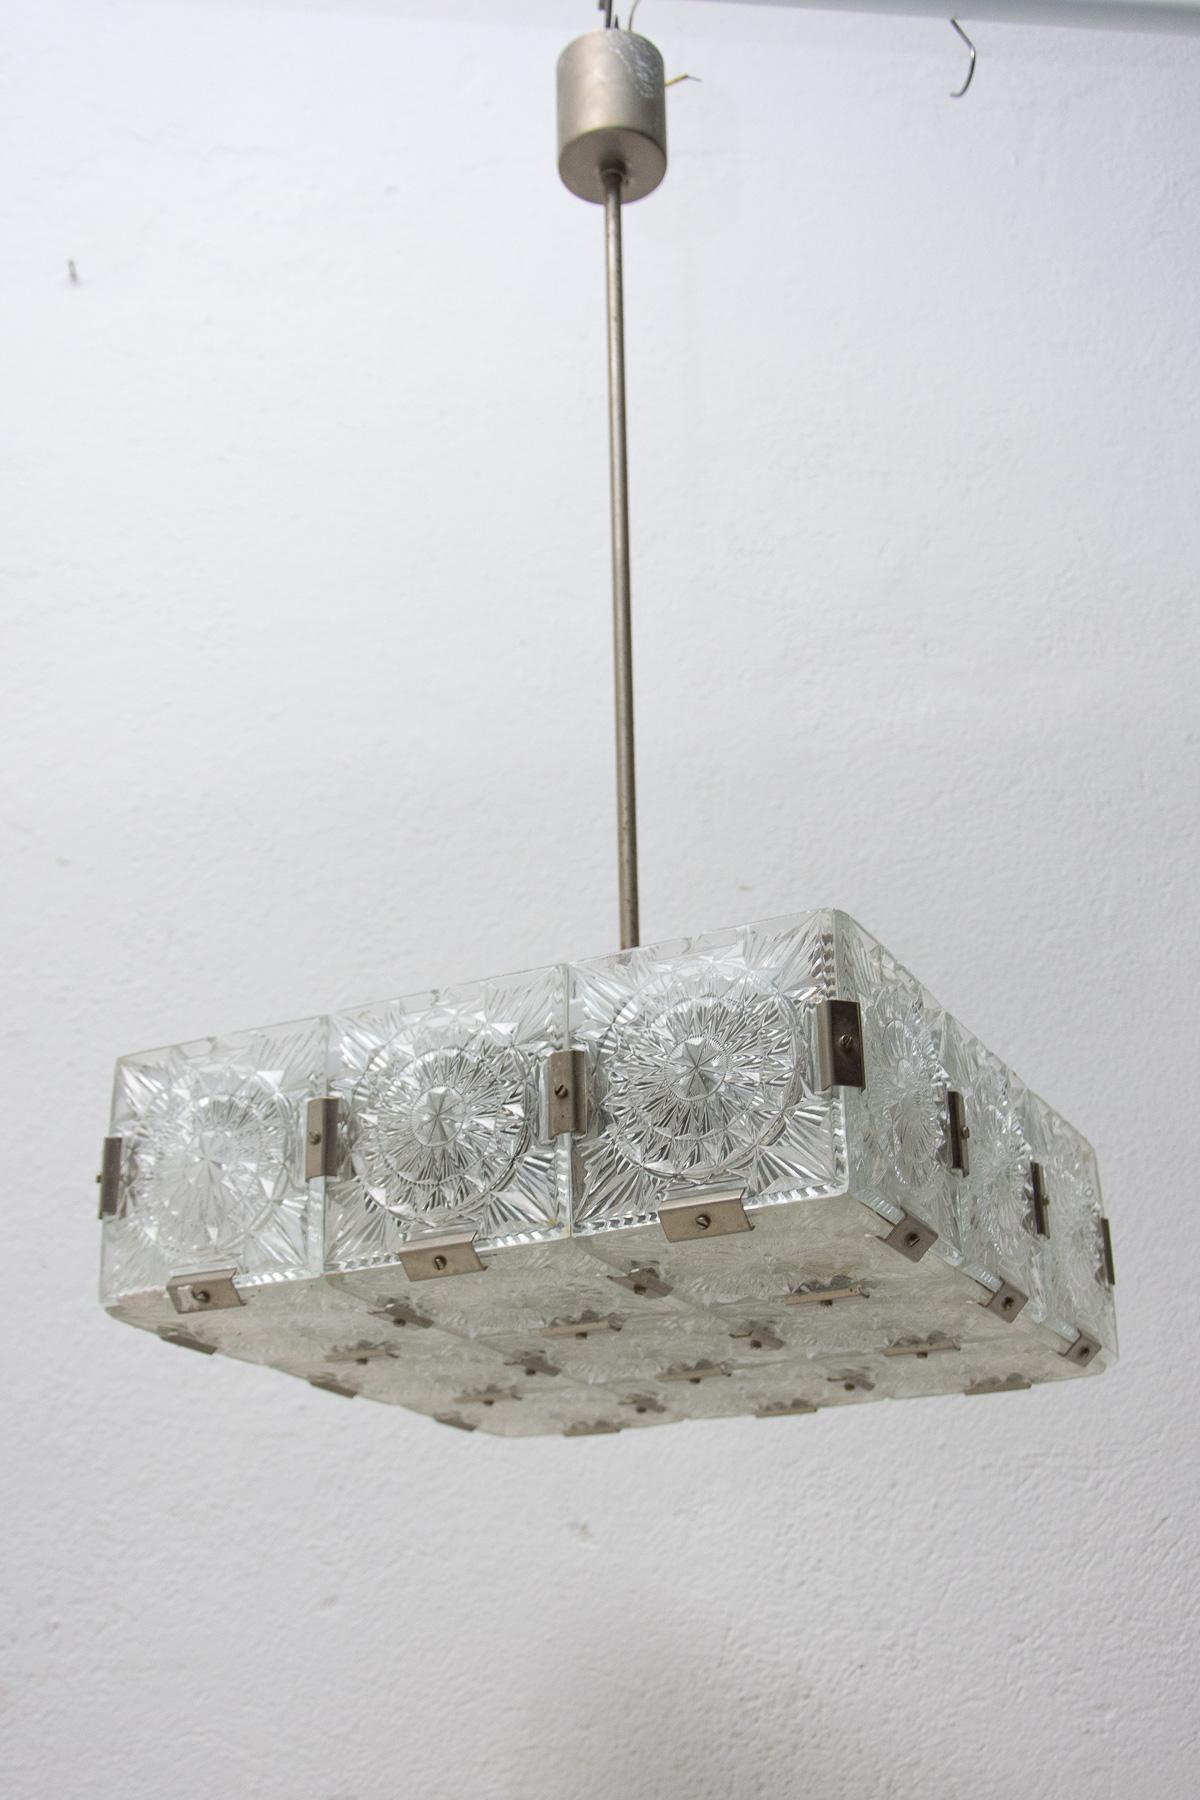 Glass and chromed steel pendant lamp, circa 1970, Czechoslovakia. It was produced by Kamenický Šenov. It is made of a combination of glass and metal. It was cleaned and rewired. E27 bulb socket. Up to 250 V

Measures: Total height: 77 cm

width: